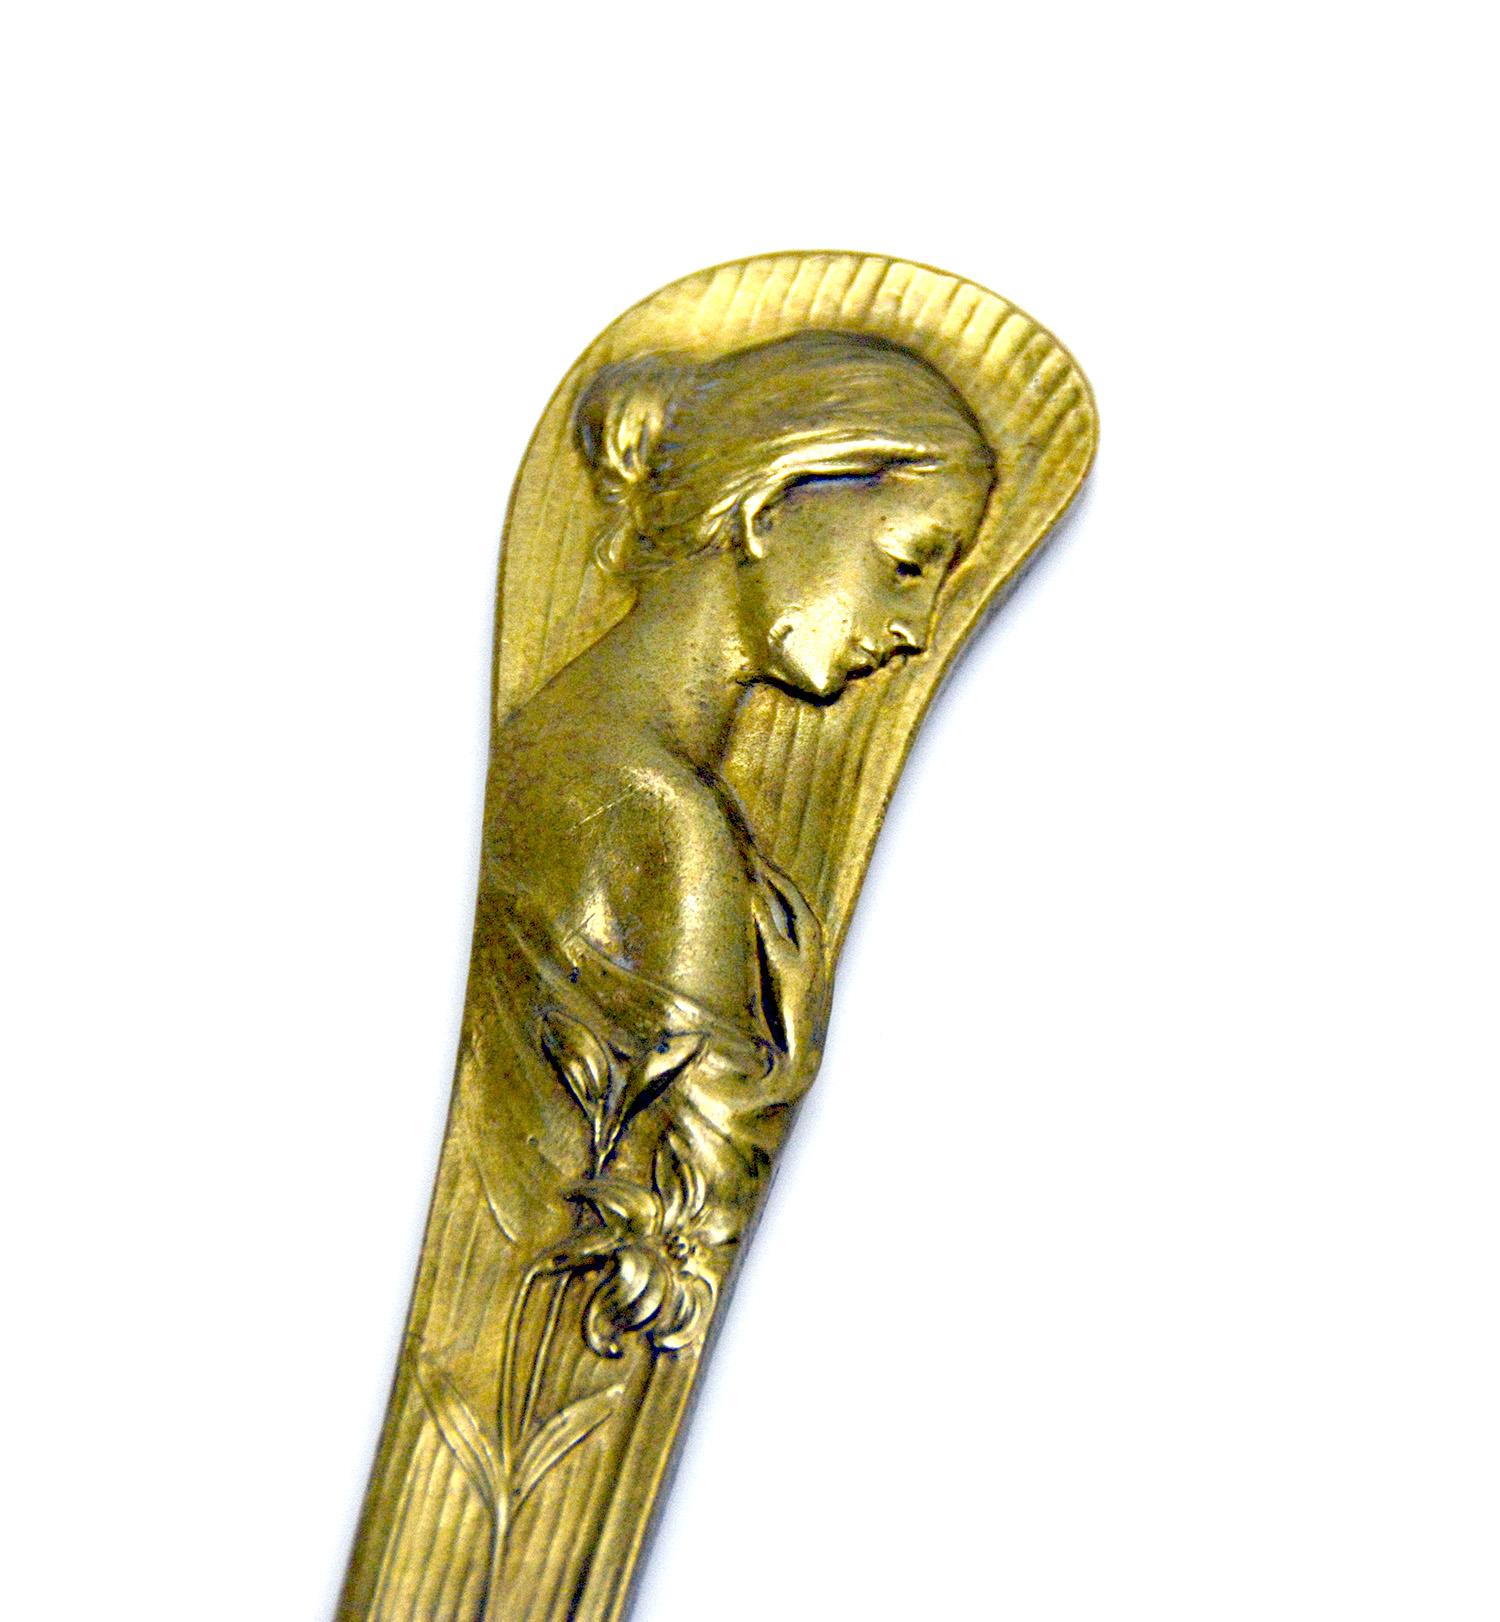 Art Nouveau lady figure bronze letter opener

Here is a Art Nouveau bronze letter opener. Front of handle depicts a Nouvea Woman Disrobing, and on the reverse there are cosmos Flowers. The entire opener is worked and extremely detailed. Signed on